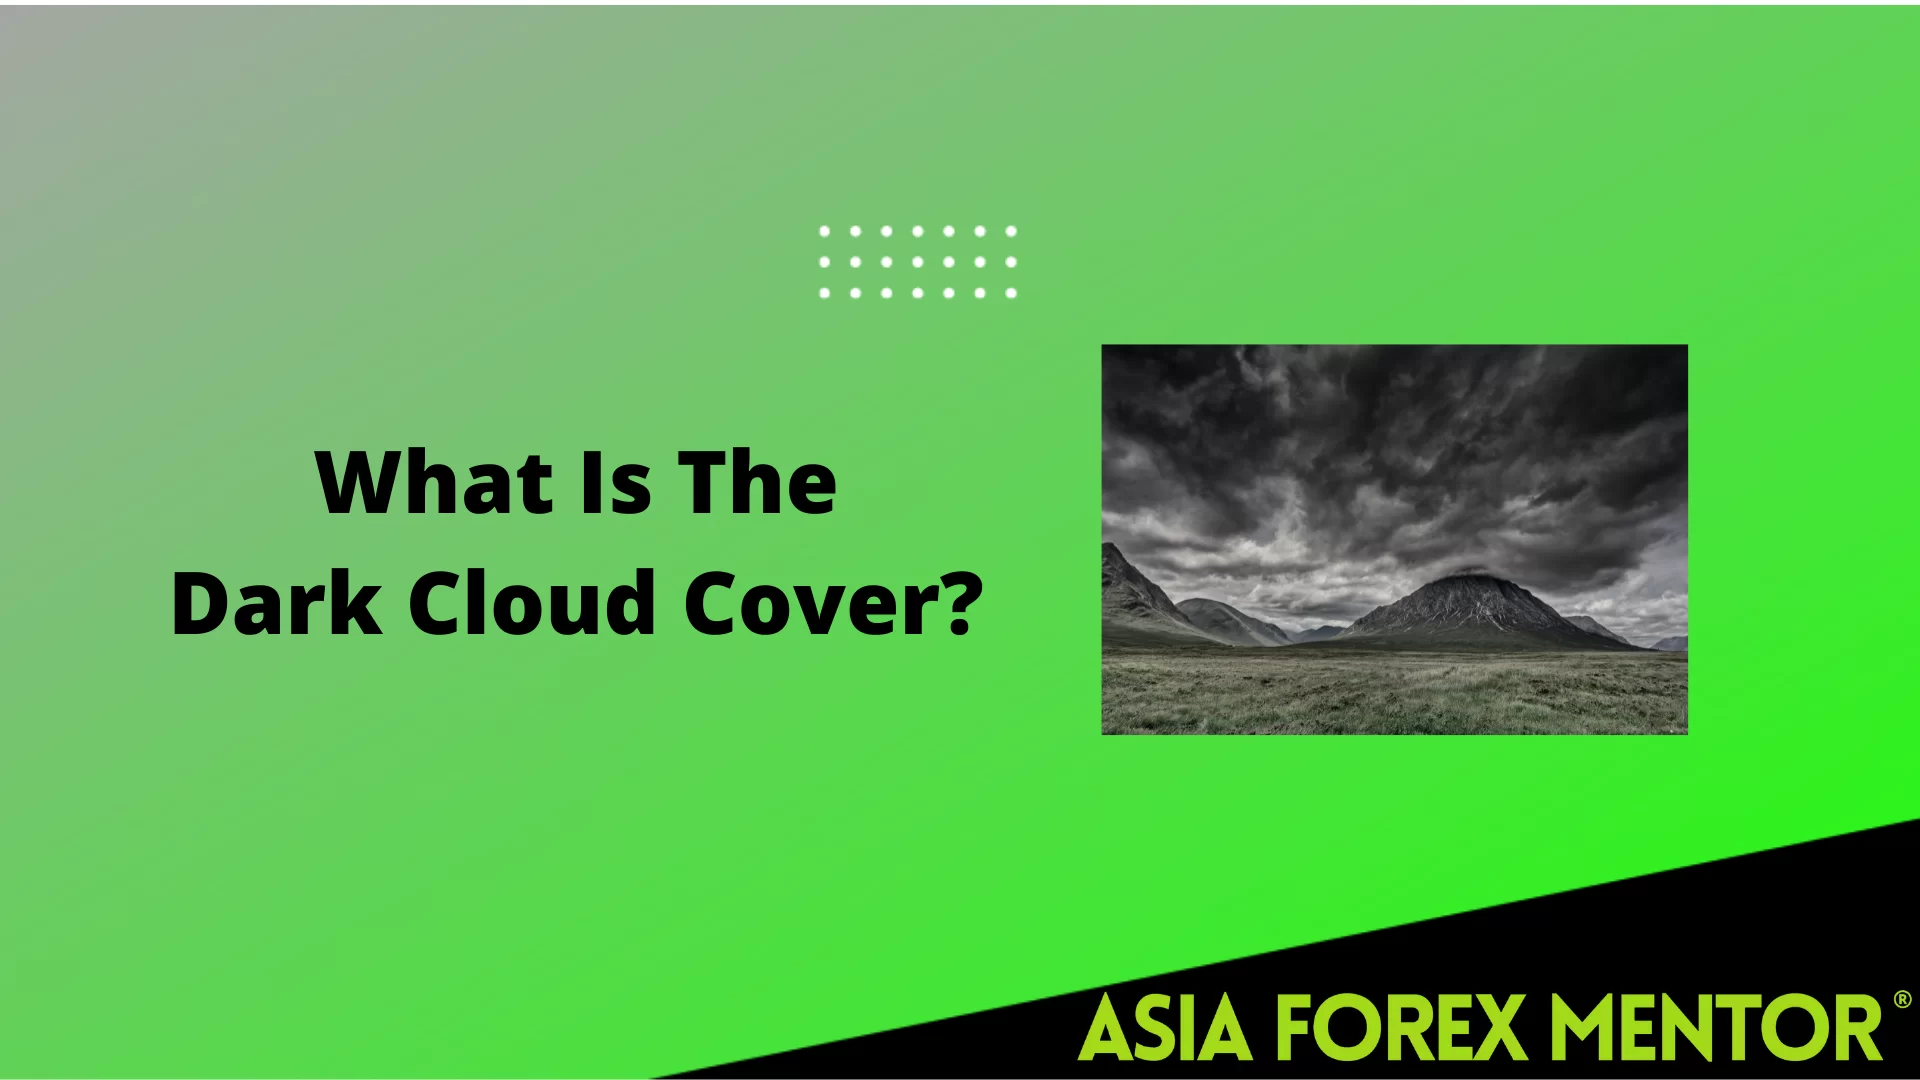 What Is The Dark Cloud Cover?